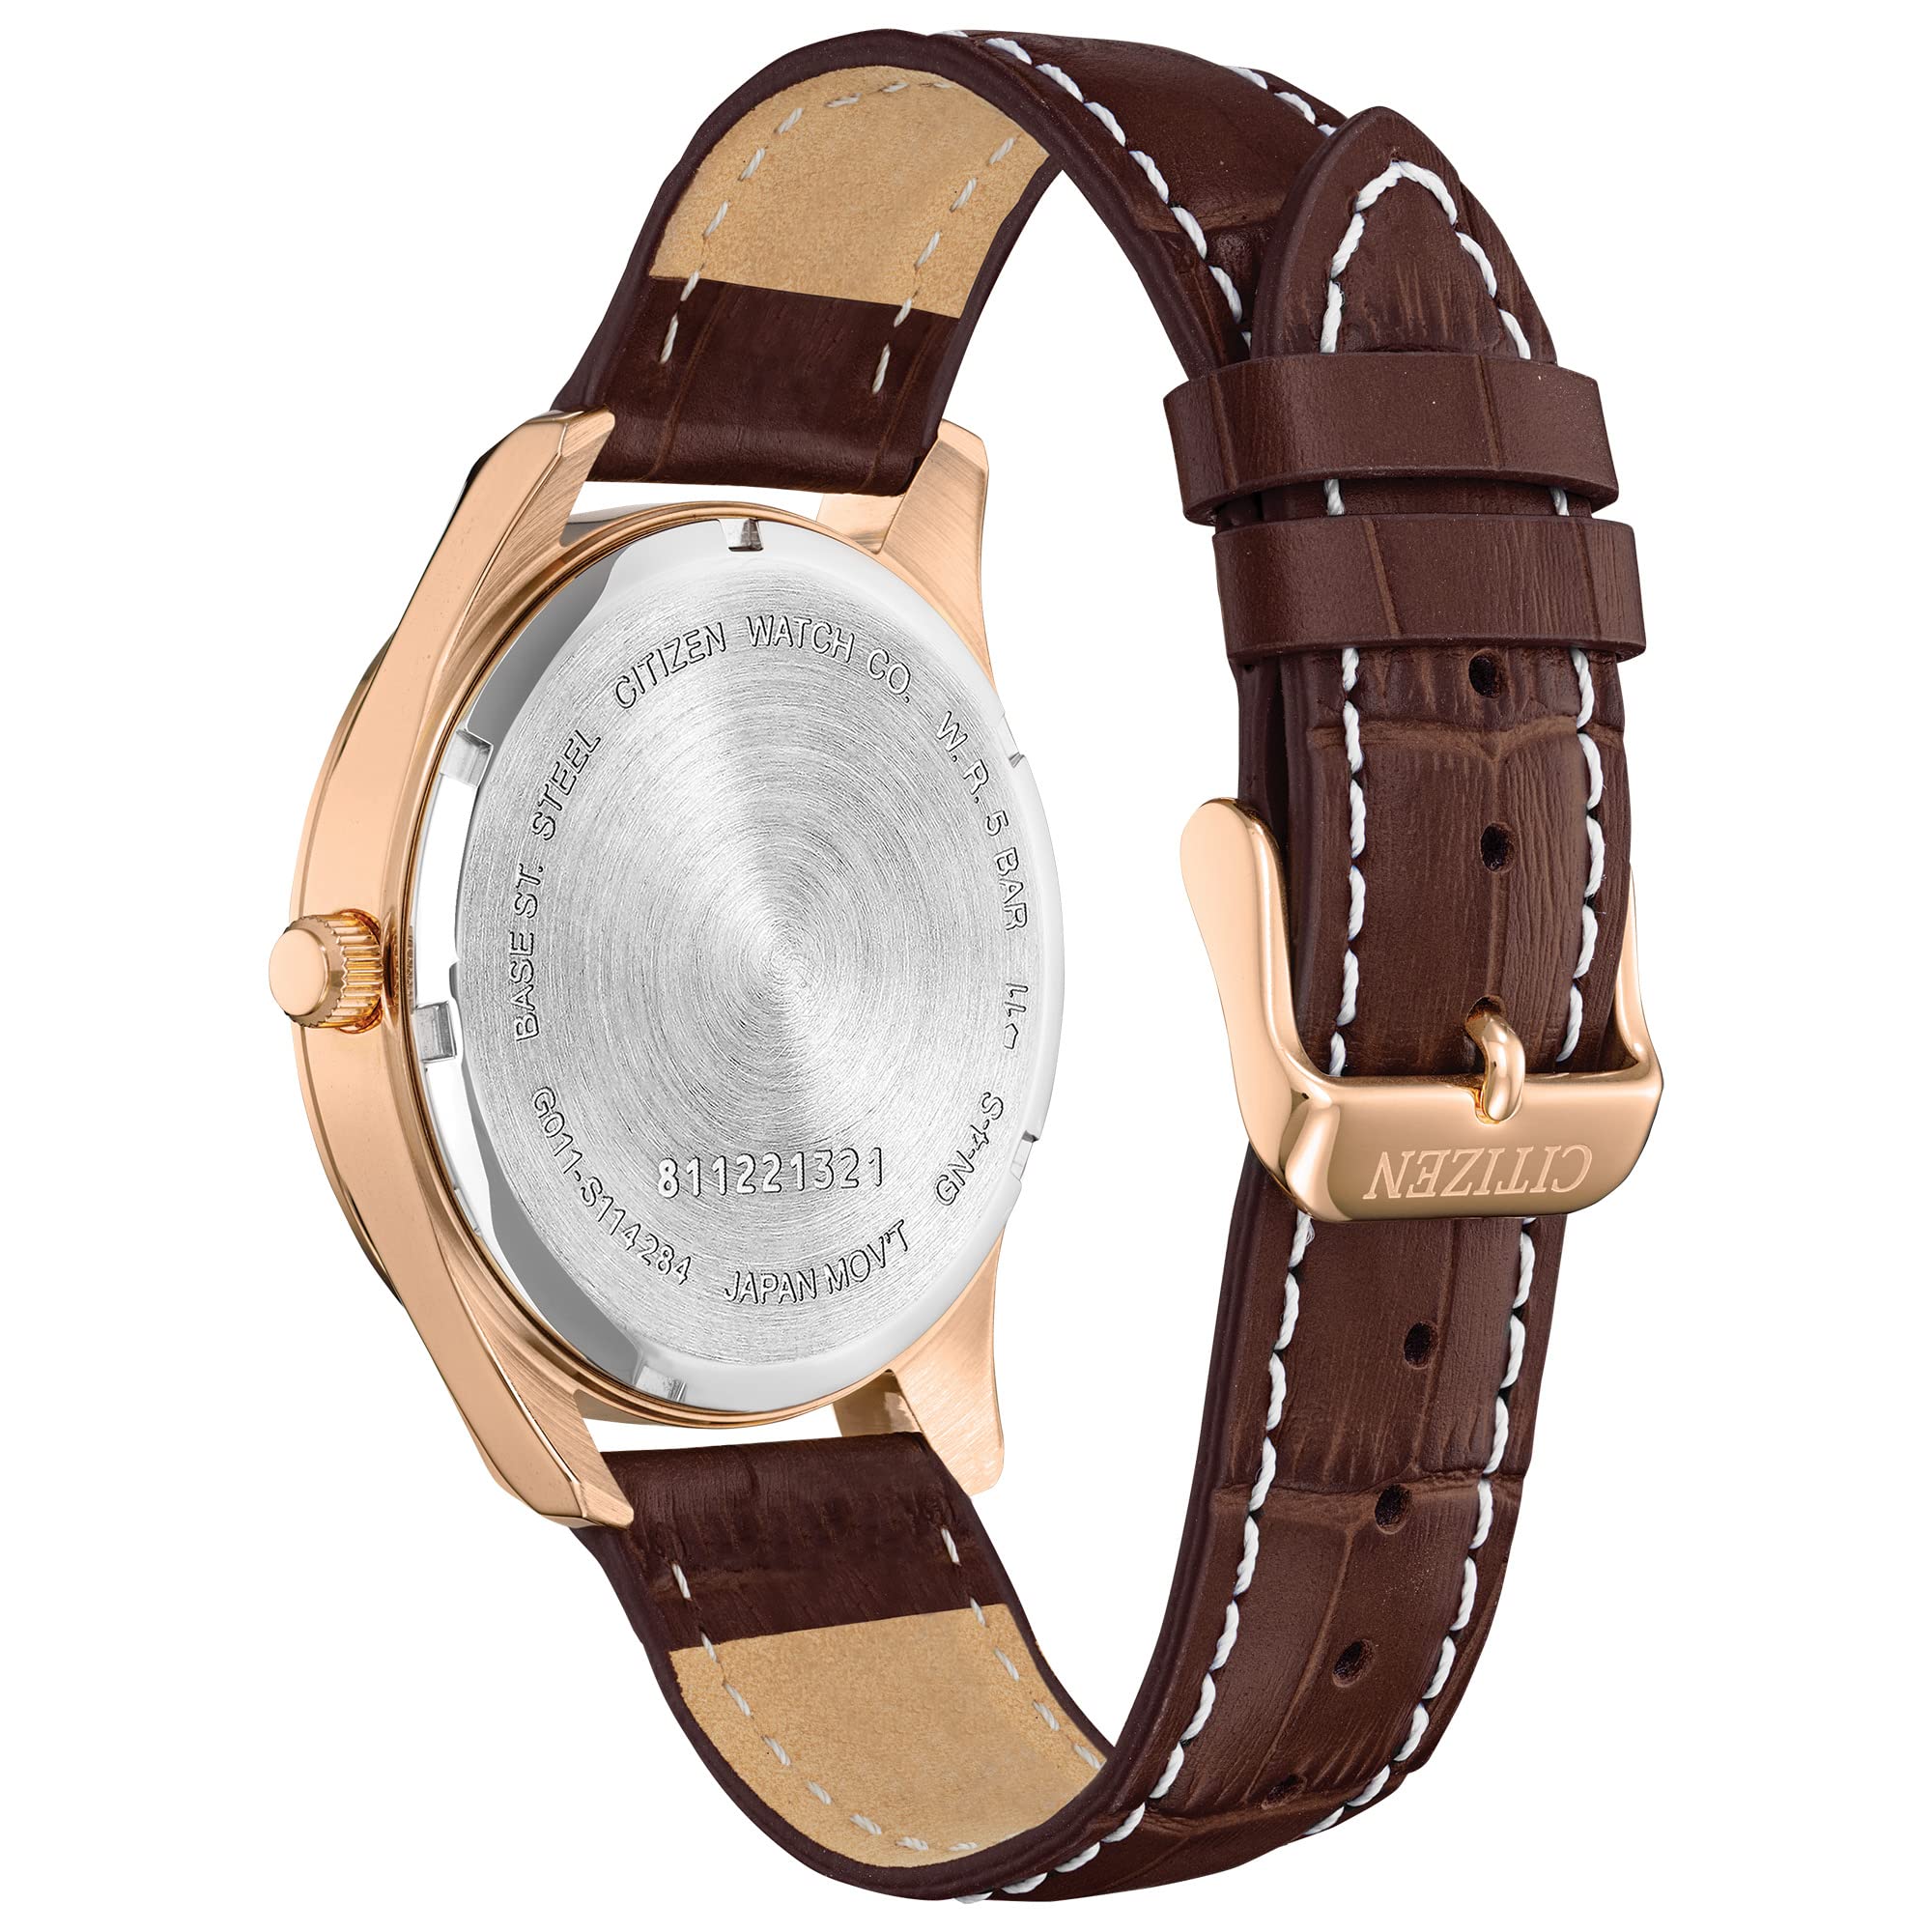 Citizen Quartz Mens Watch, Stainless Steel with Leather strap, Casual, Brown (Model: BI1033-04E)